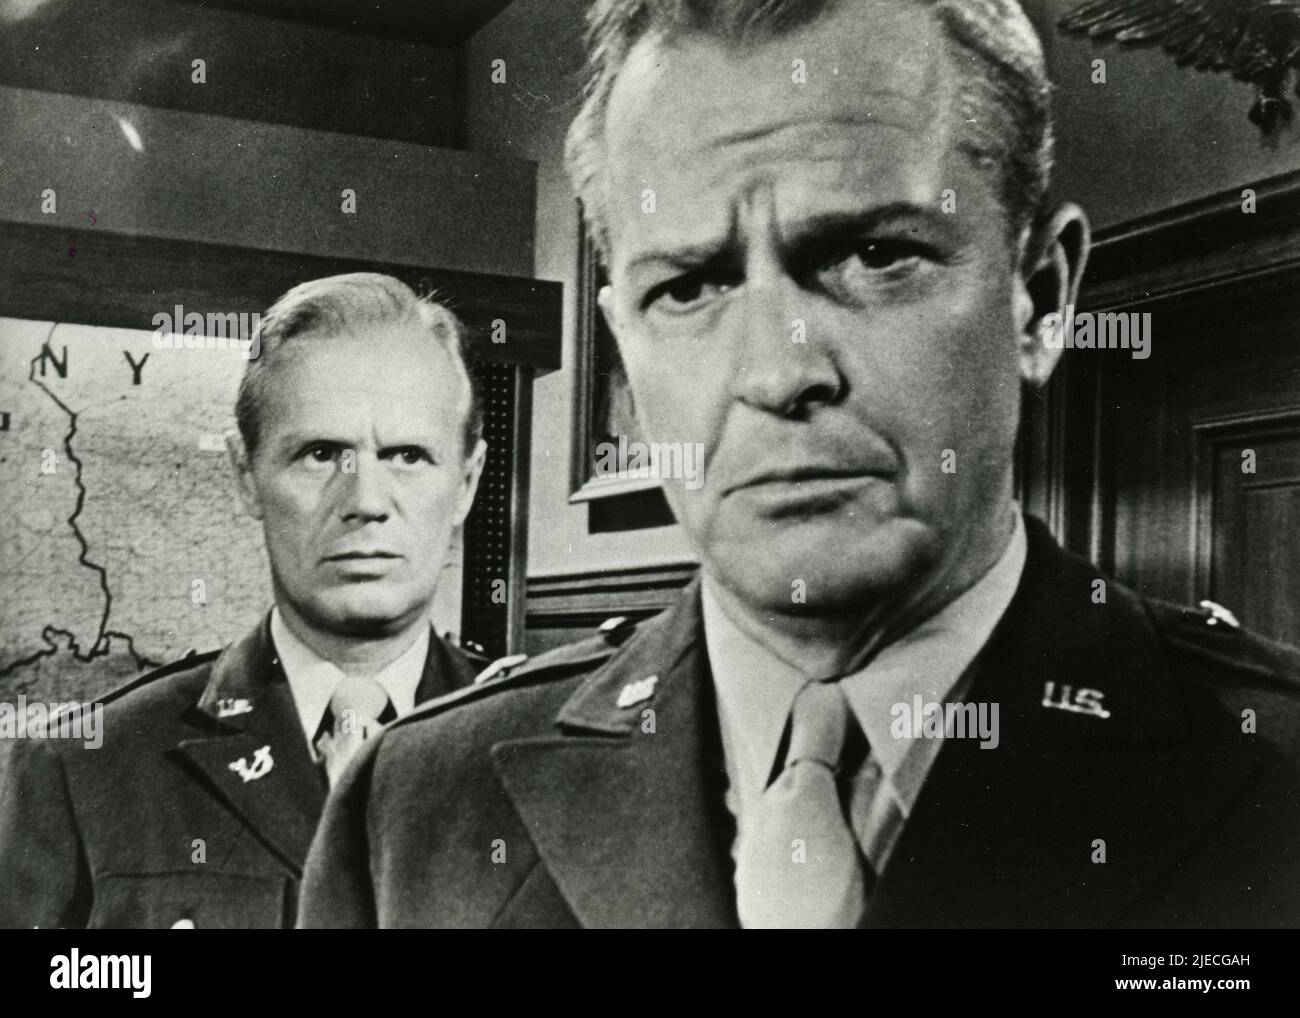 American actors Richard Widmark and Alan Baxter in the movie Judgment at Nuremberg, USA 1961 Stock Photo